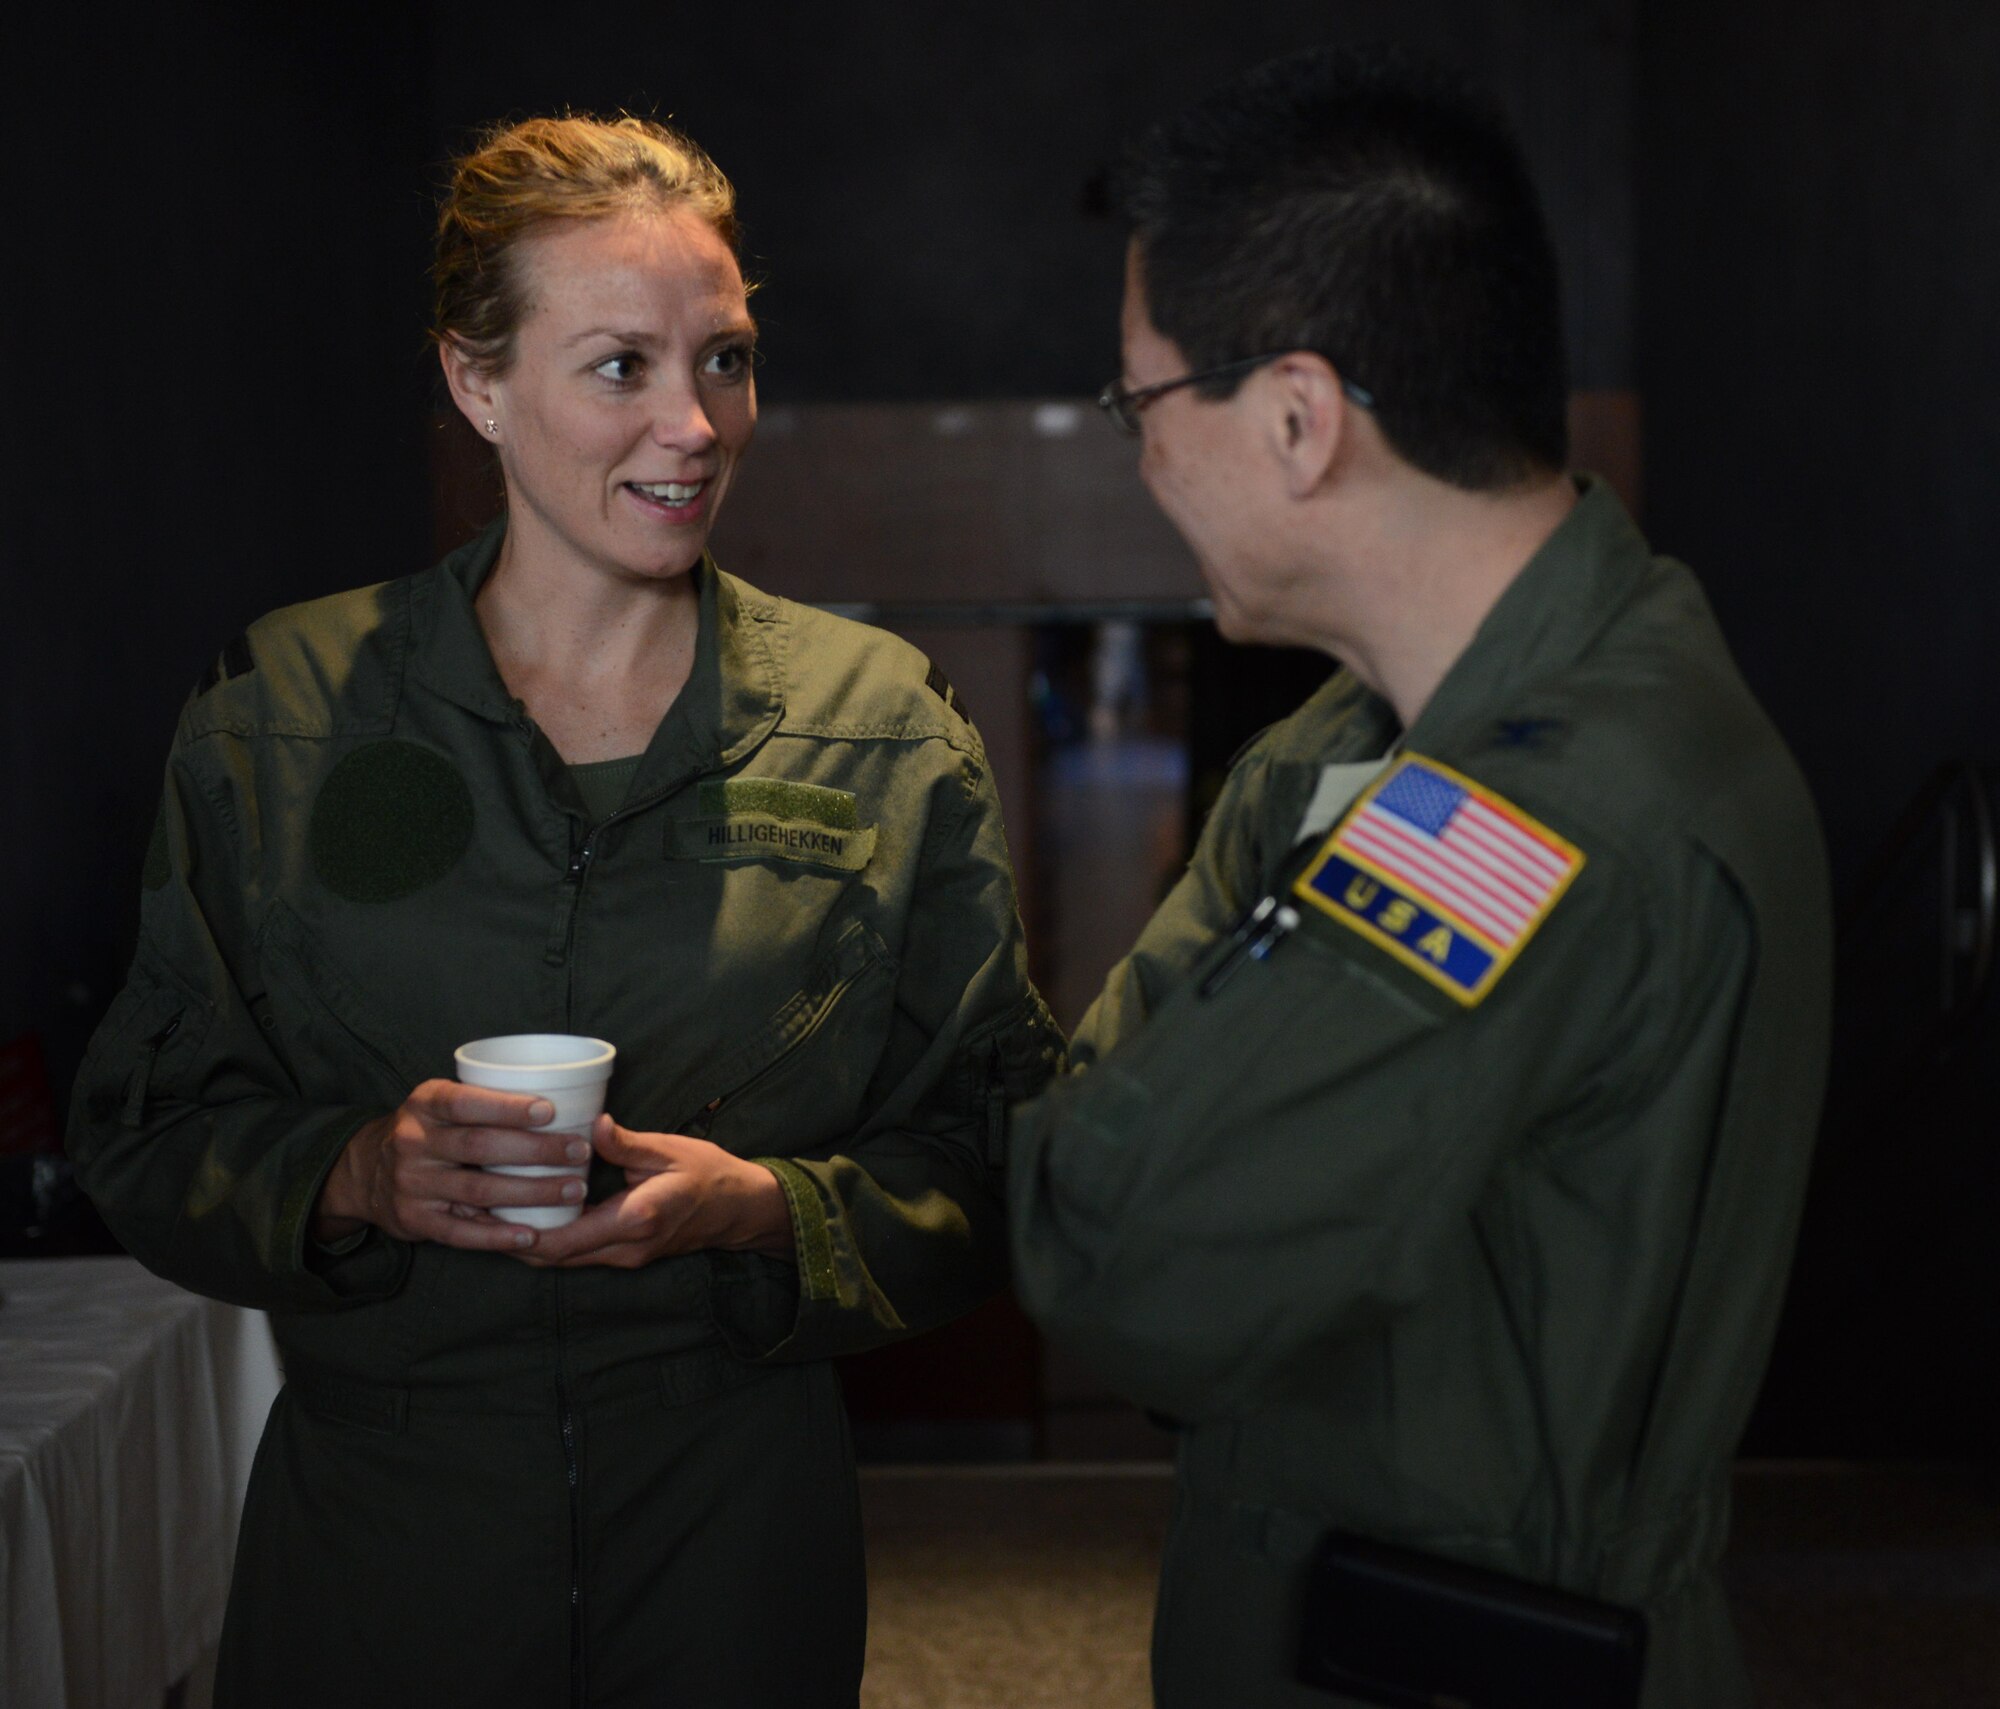 RAMSTEIN AIR BASE, Germany – Capt. Sjaane Hilligehekken, Royal Netherlands air force flight surgeon, enjoys some conversation with one of the attendees of the 29th Annual Aerospace Medicine Summit and NATO Science and Technology Organization Technical Course at the Hercules Theater here March 10, 2014. Hilligehekken joined more than 170 medical professionals from 16 nations at the summit, a joint effort between the U.S. Air Force’s in Europe-Air Forces Africa Surgeon General’s office and NATO to share information in the aerospace medical world and build relationships with international partners. (U.S. Air Force Photo by Tech. Sgt. James M. Hodgman)